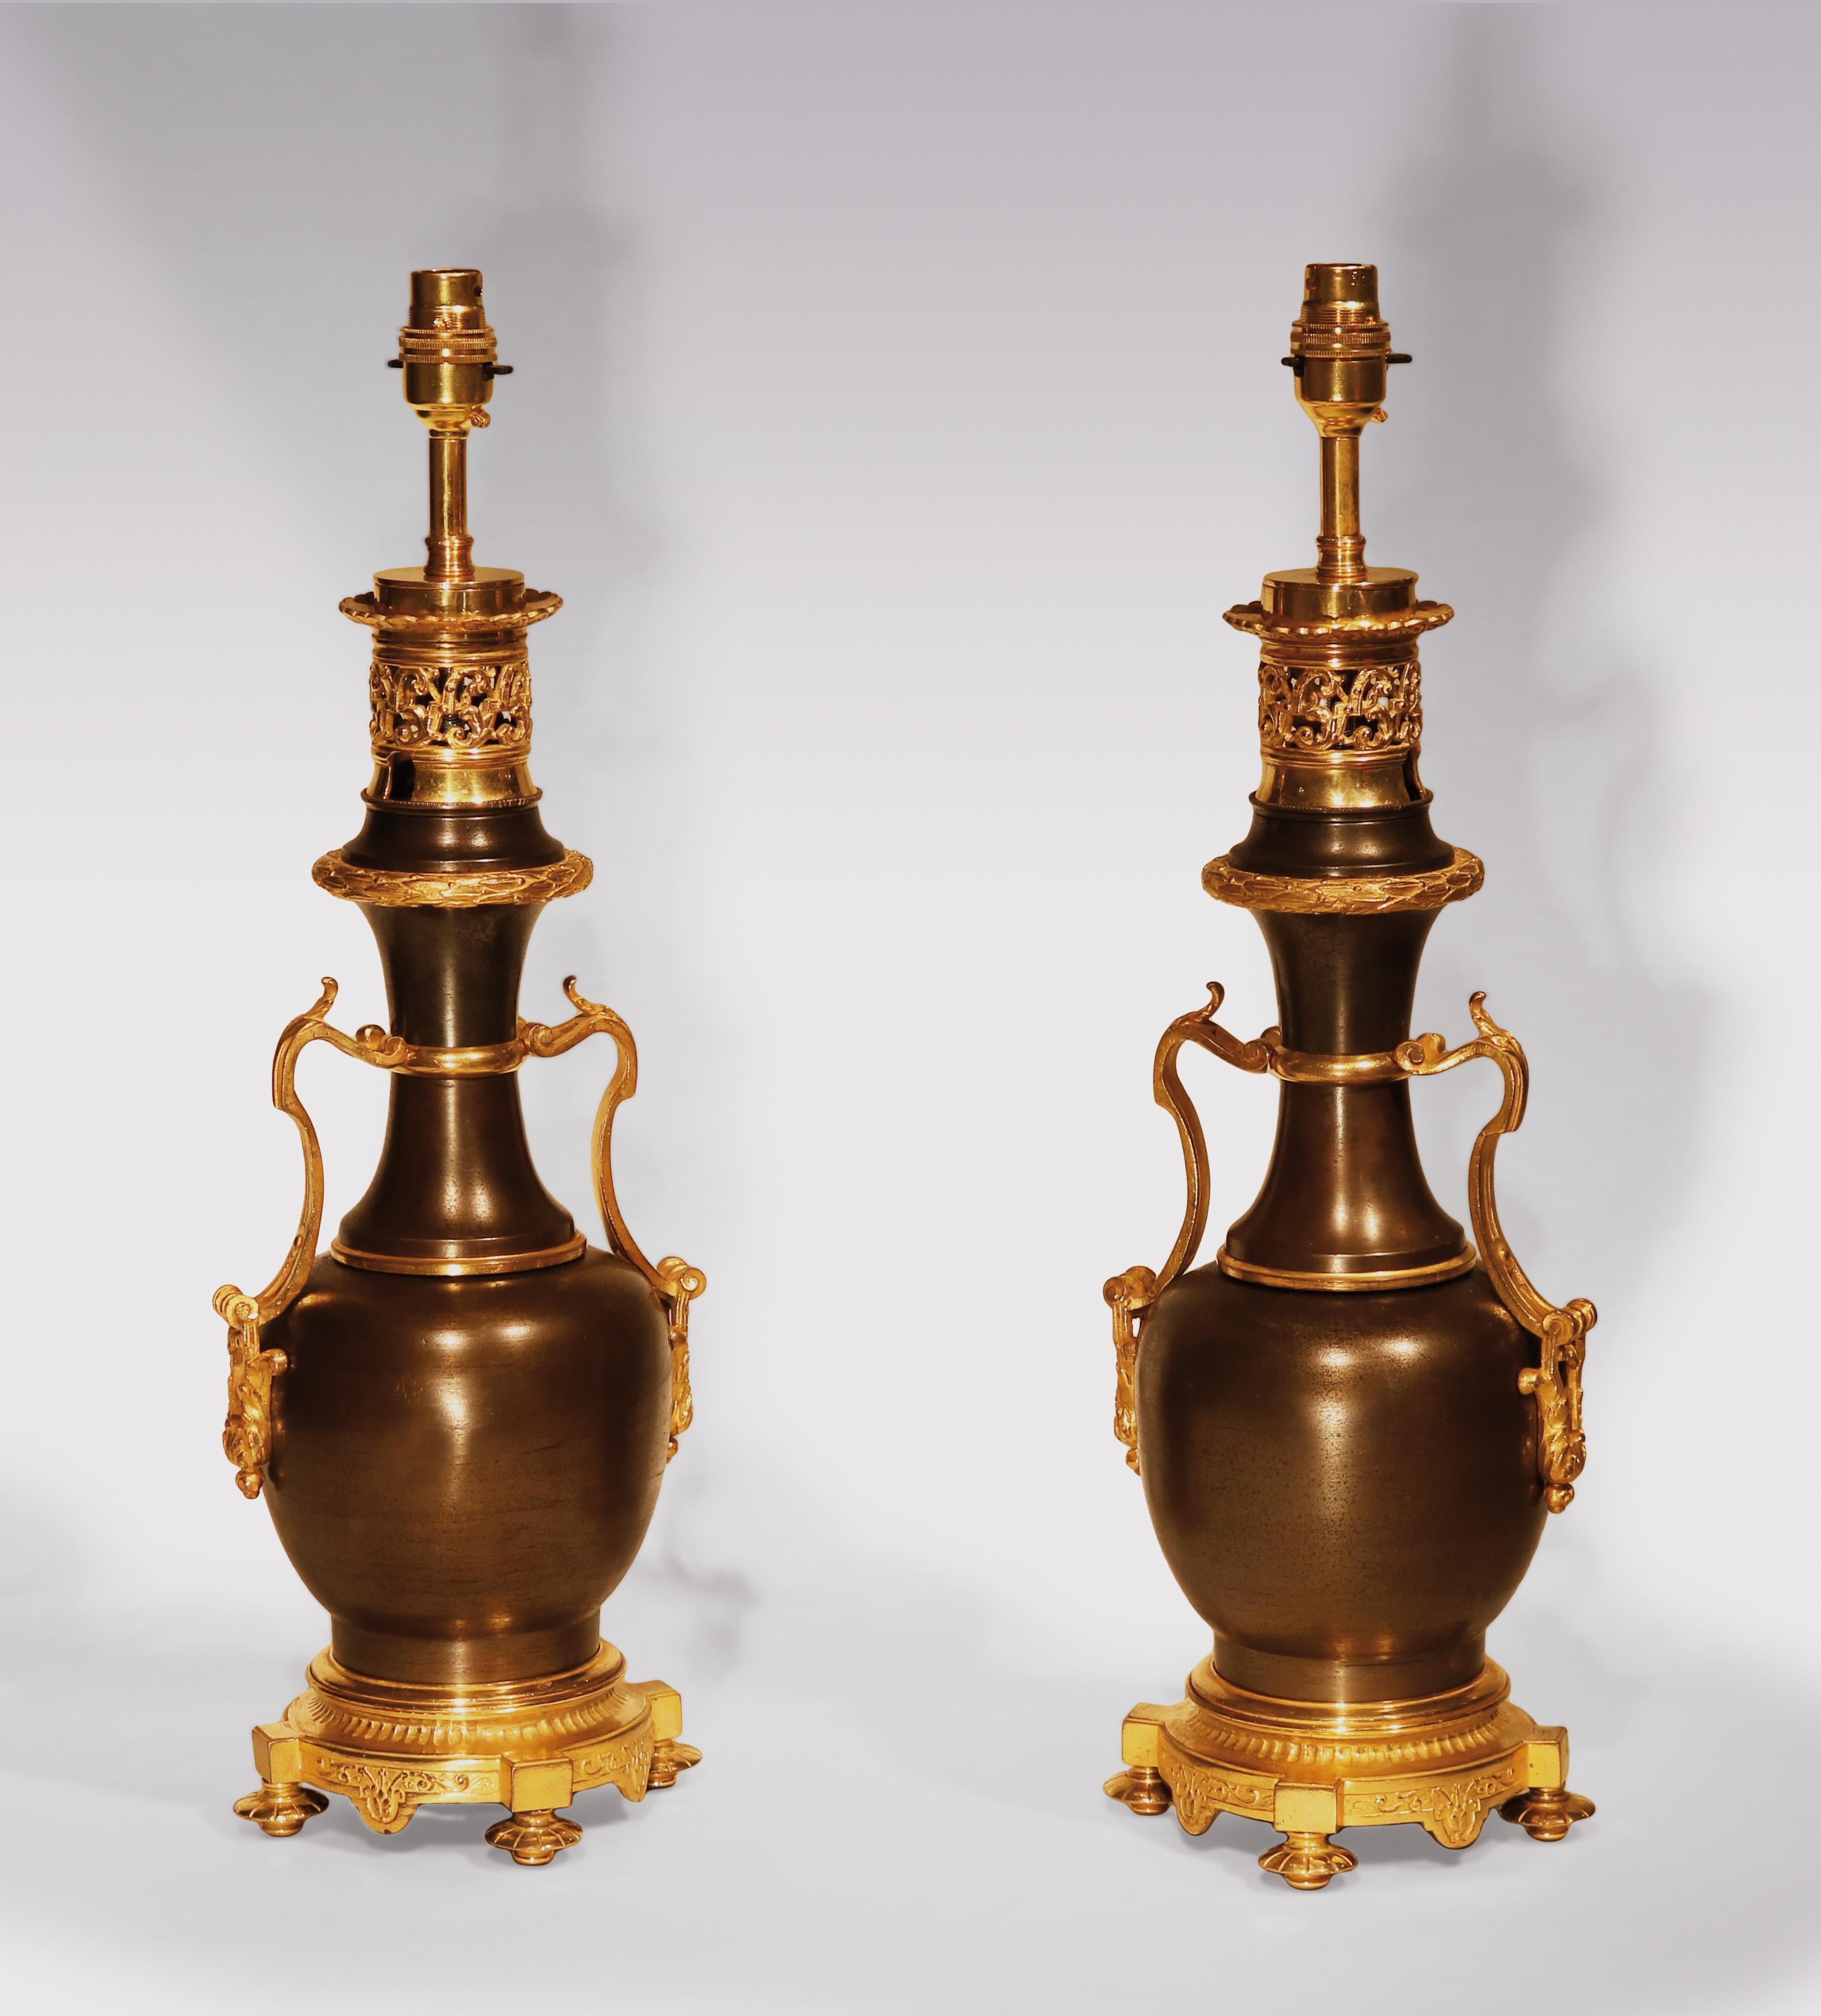 A pair of mid-19th century bronze and ormolu oil Lamps in the form of bulbous shaped vases with scrolled carrying handles, ending on circular bases supported on turned petal feet.
(Now converted to lamps).